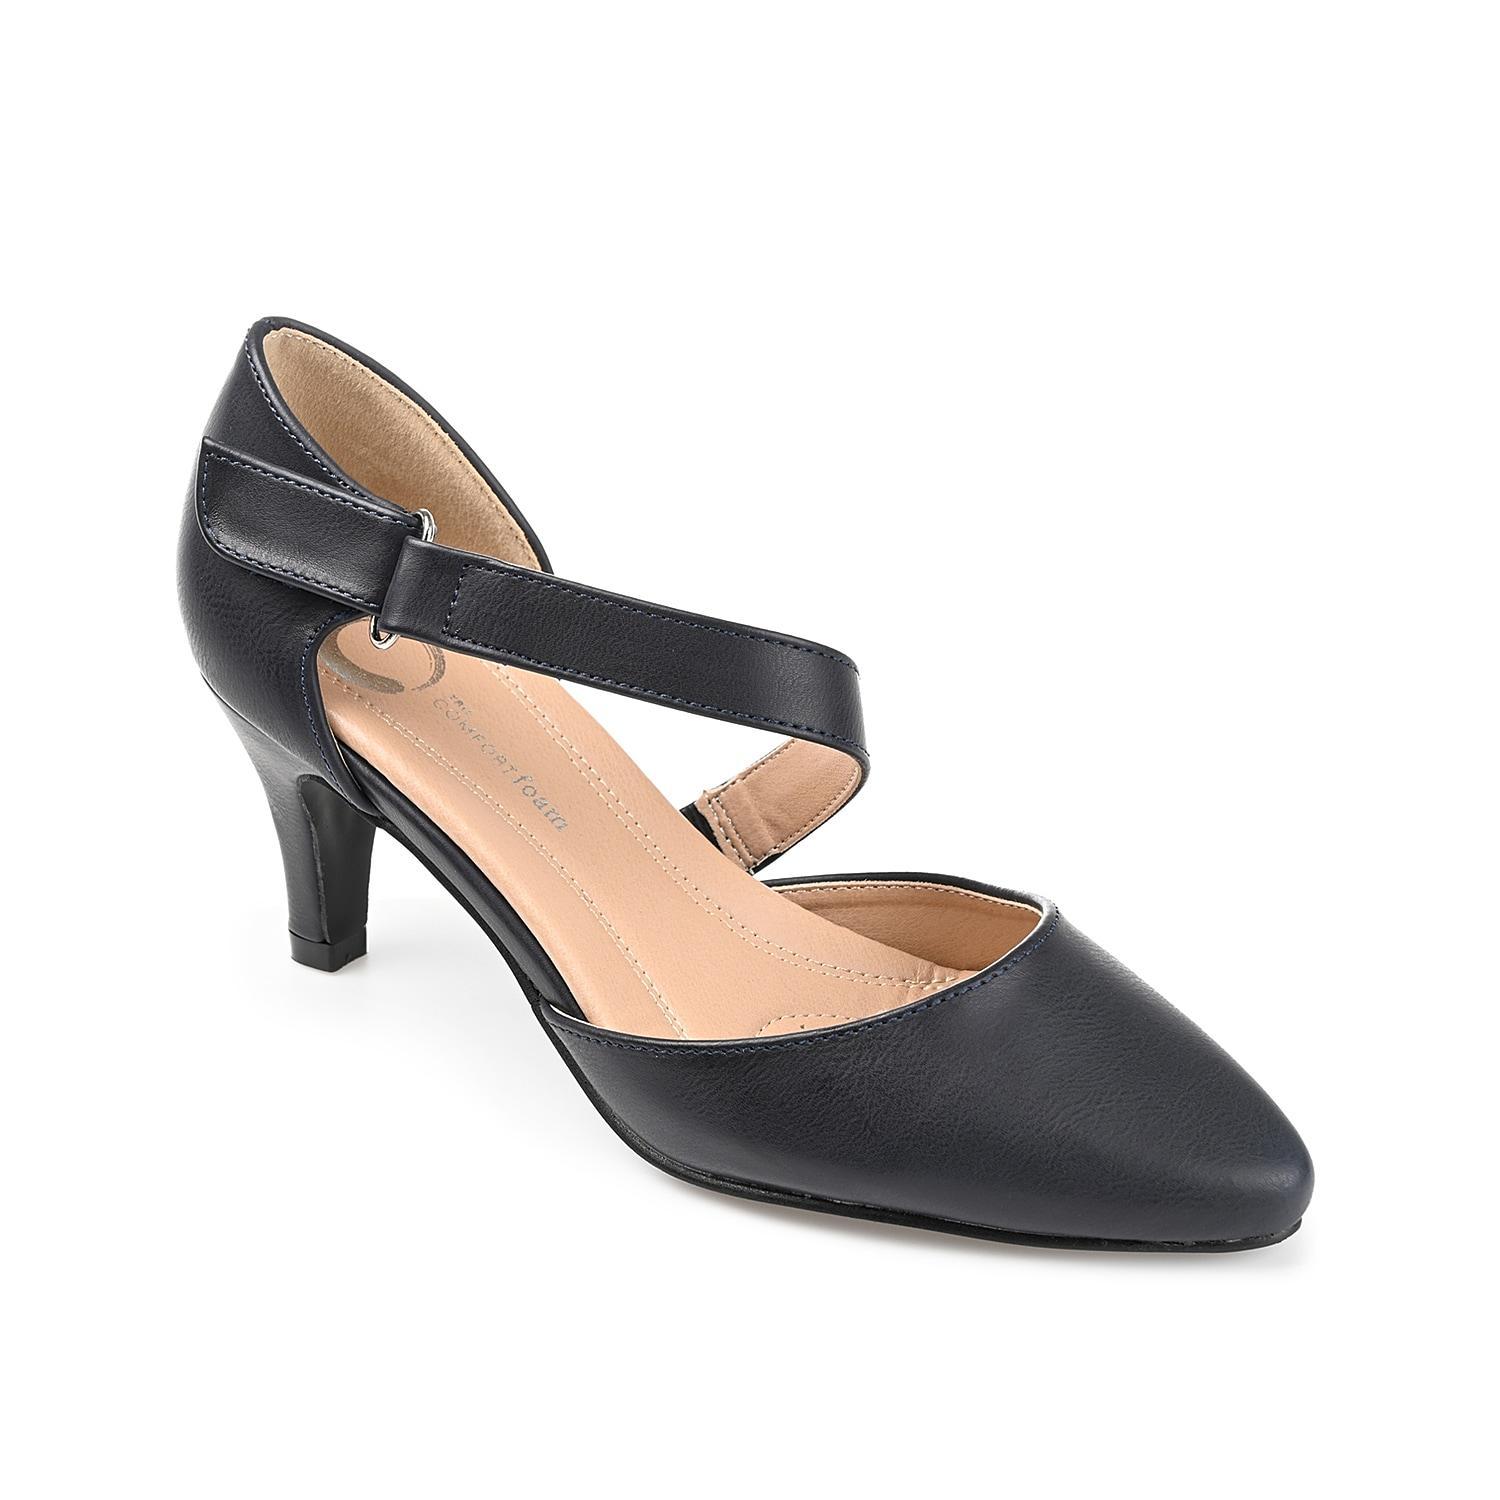 Journee Collection Journee Collection Tillis Womens DOrsay Pumps Black Product Image